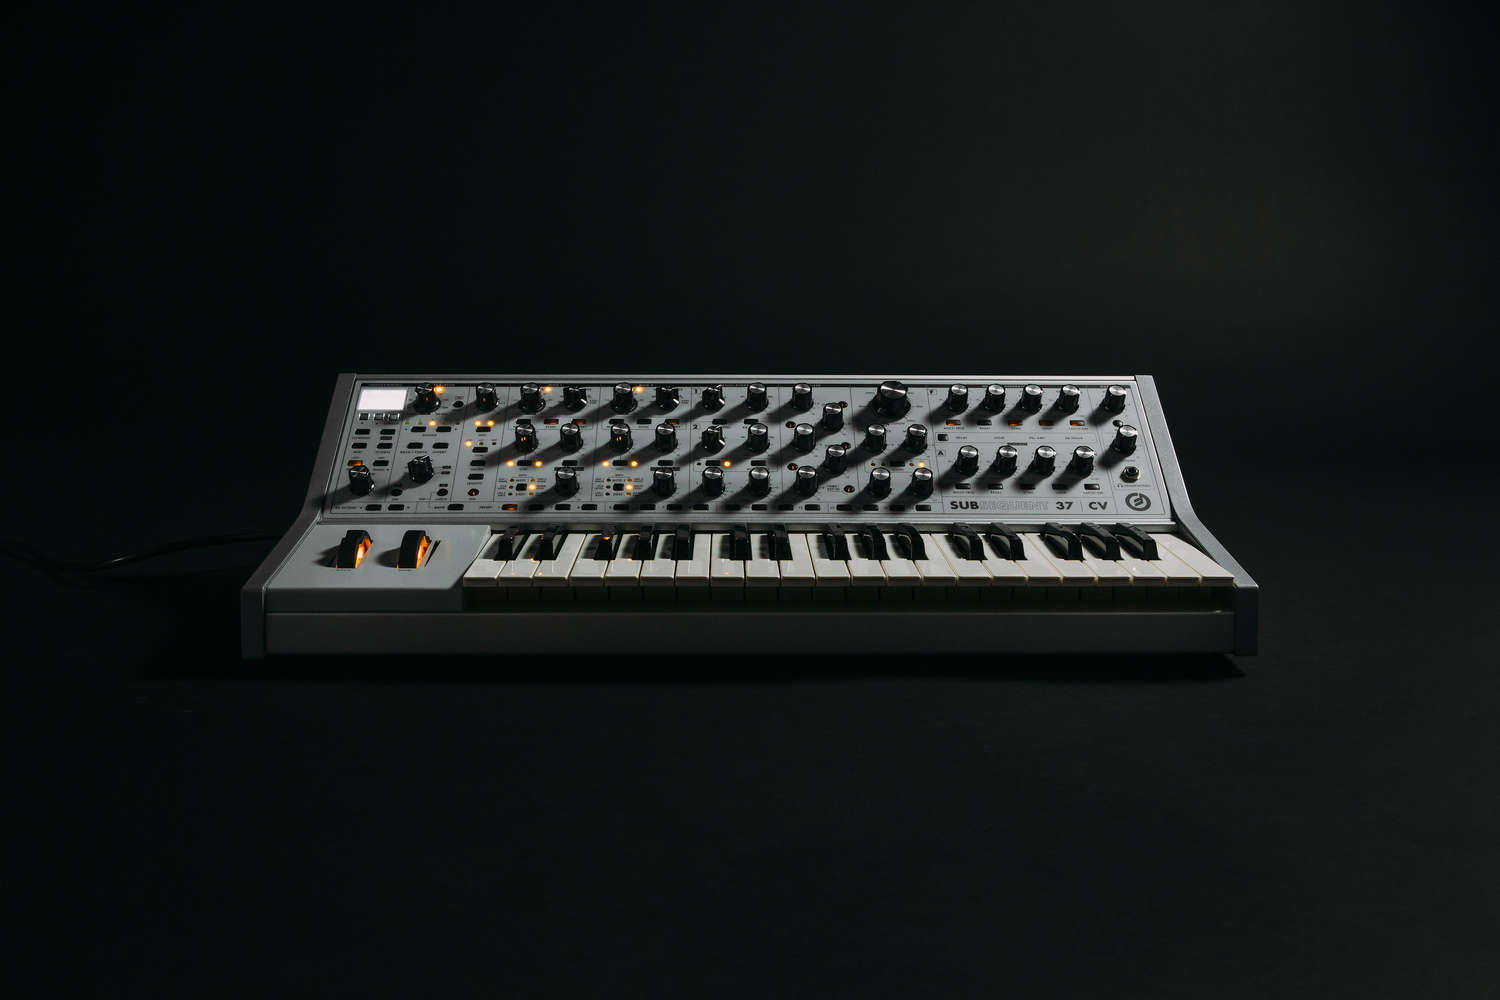 Subsequent 37 CV | Moog